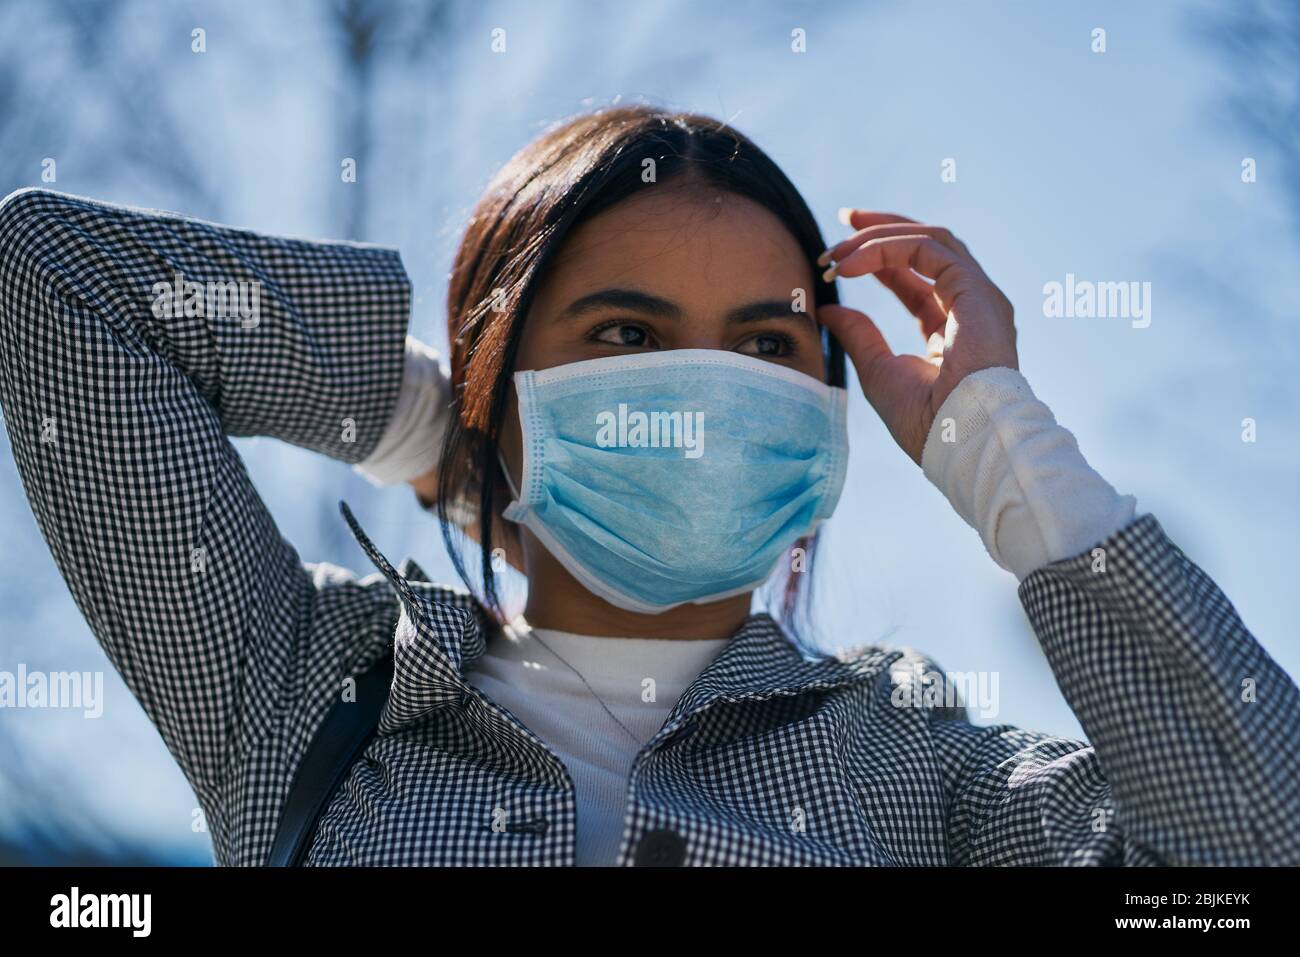 Girl putting on a protective mask to avoid contagion while walking down the street. Coronavirus concept. Stock Photo